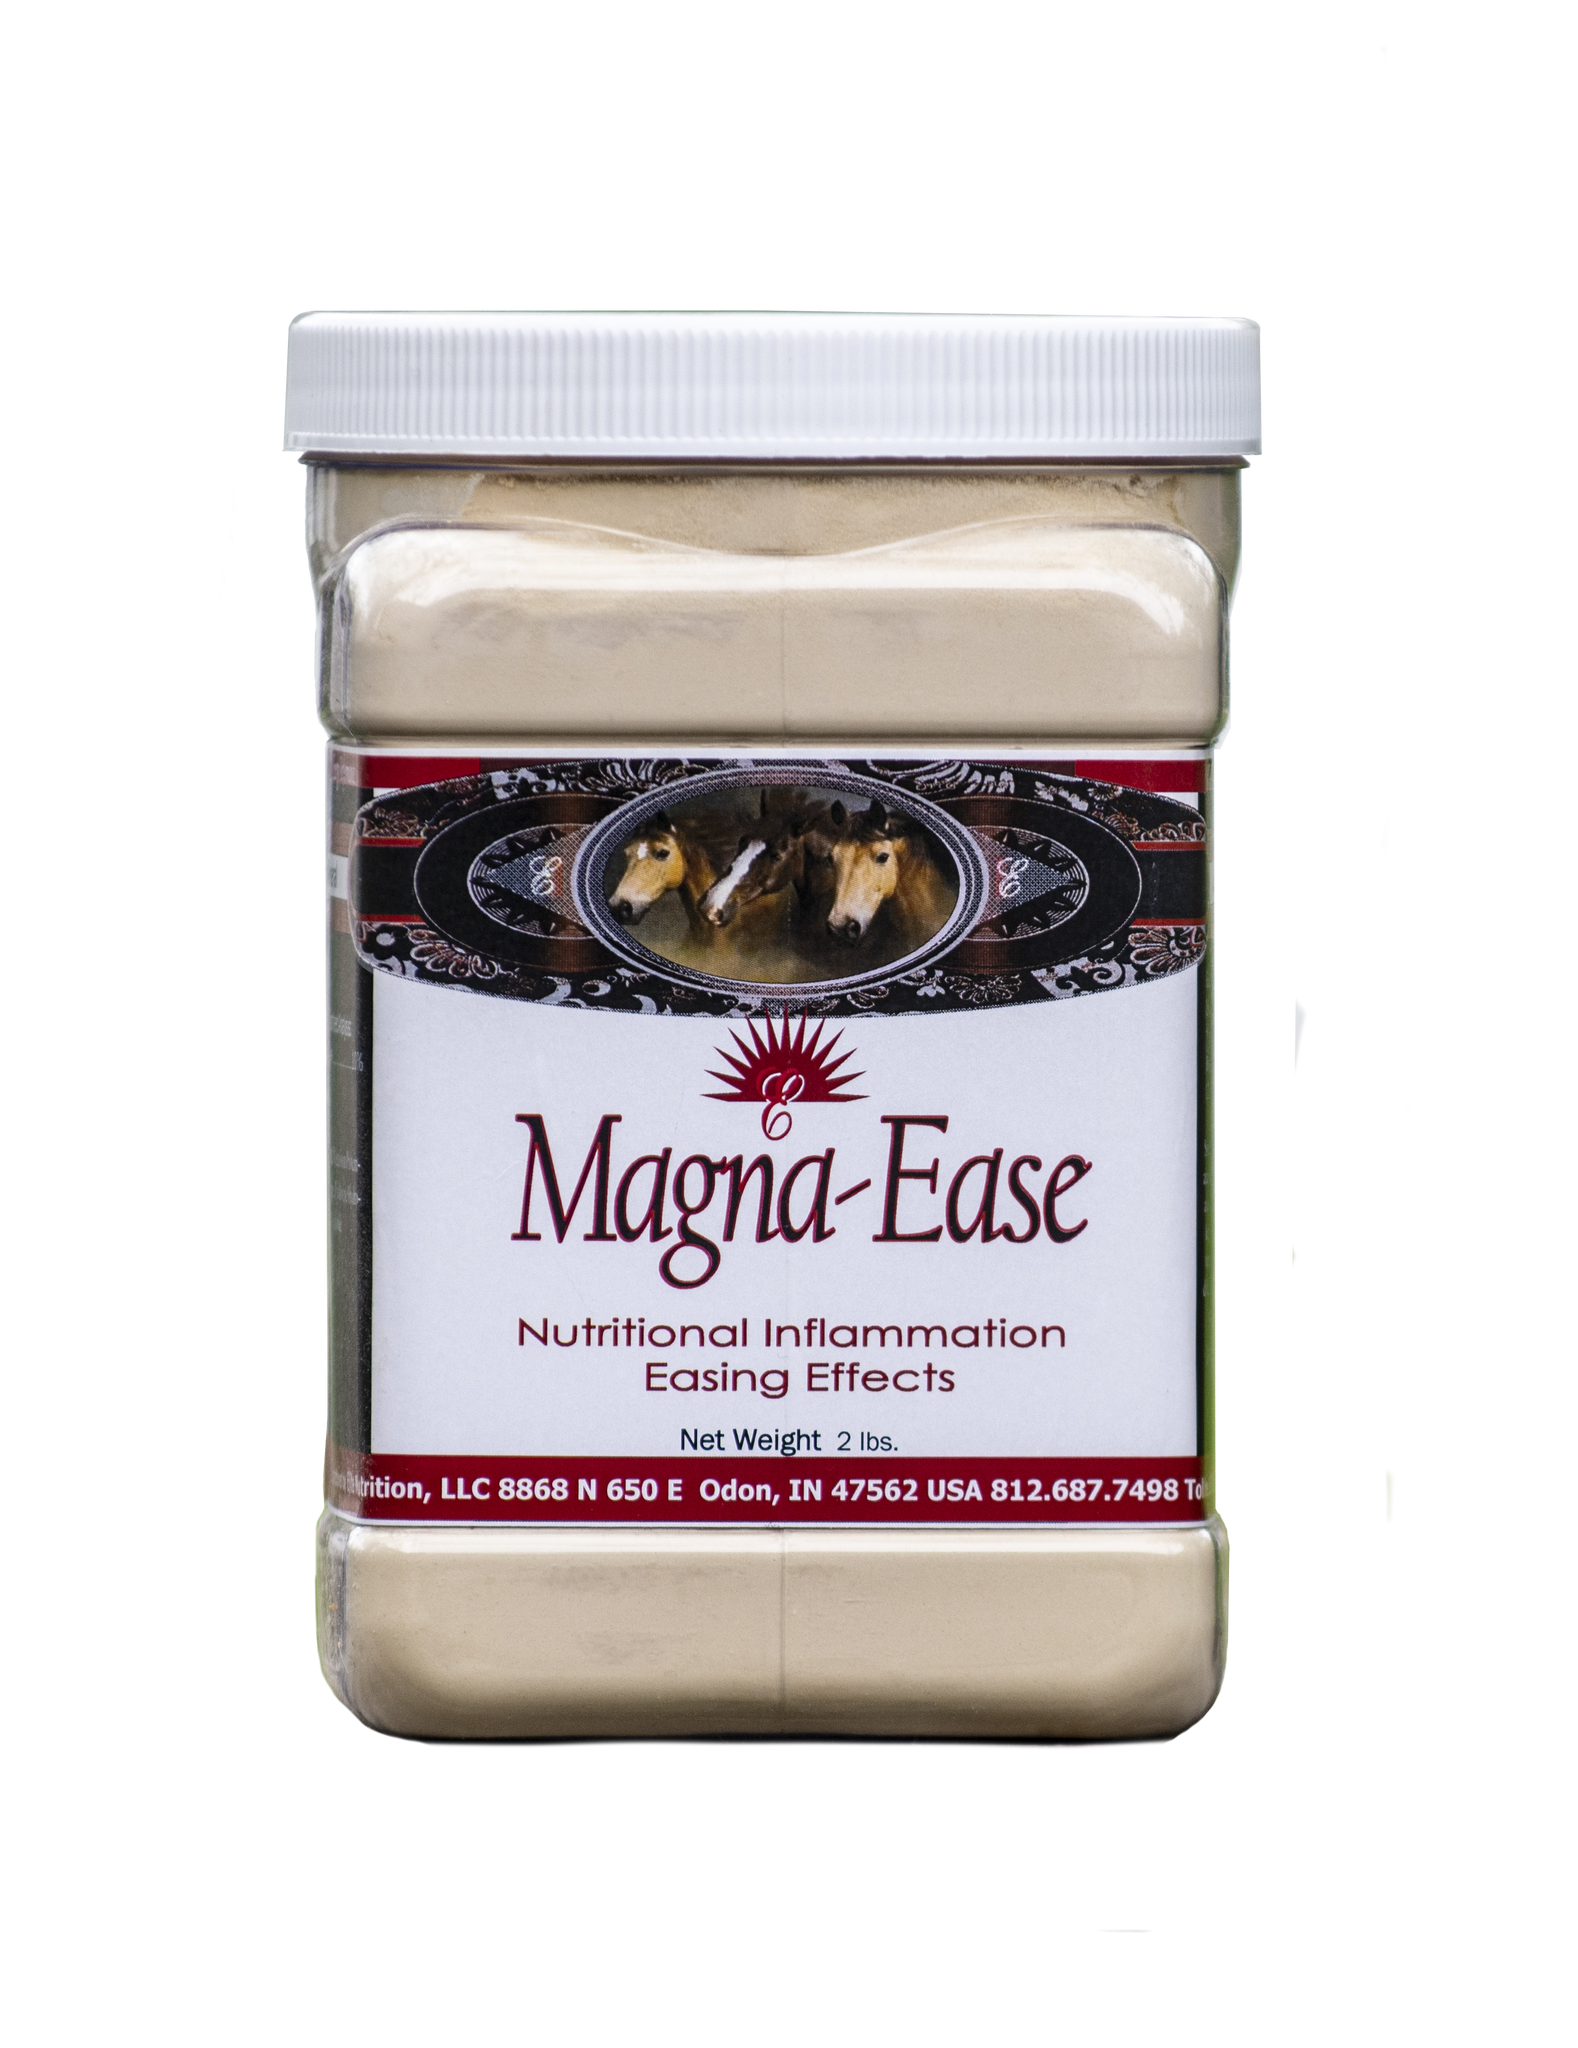 MAGNA-EASE -Equine Nutritional Support for Muscle Inflammation & Swelling